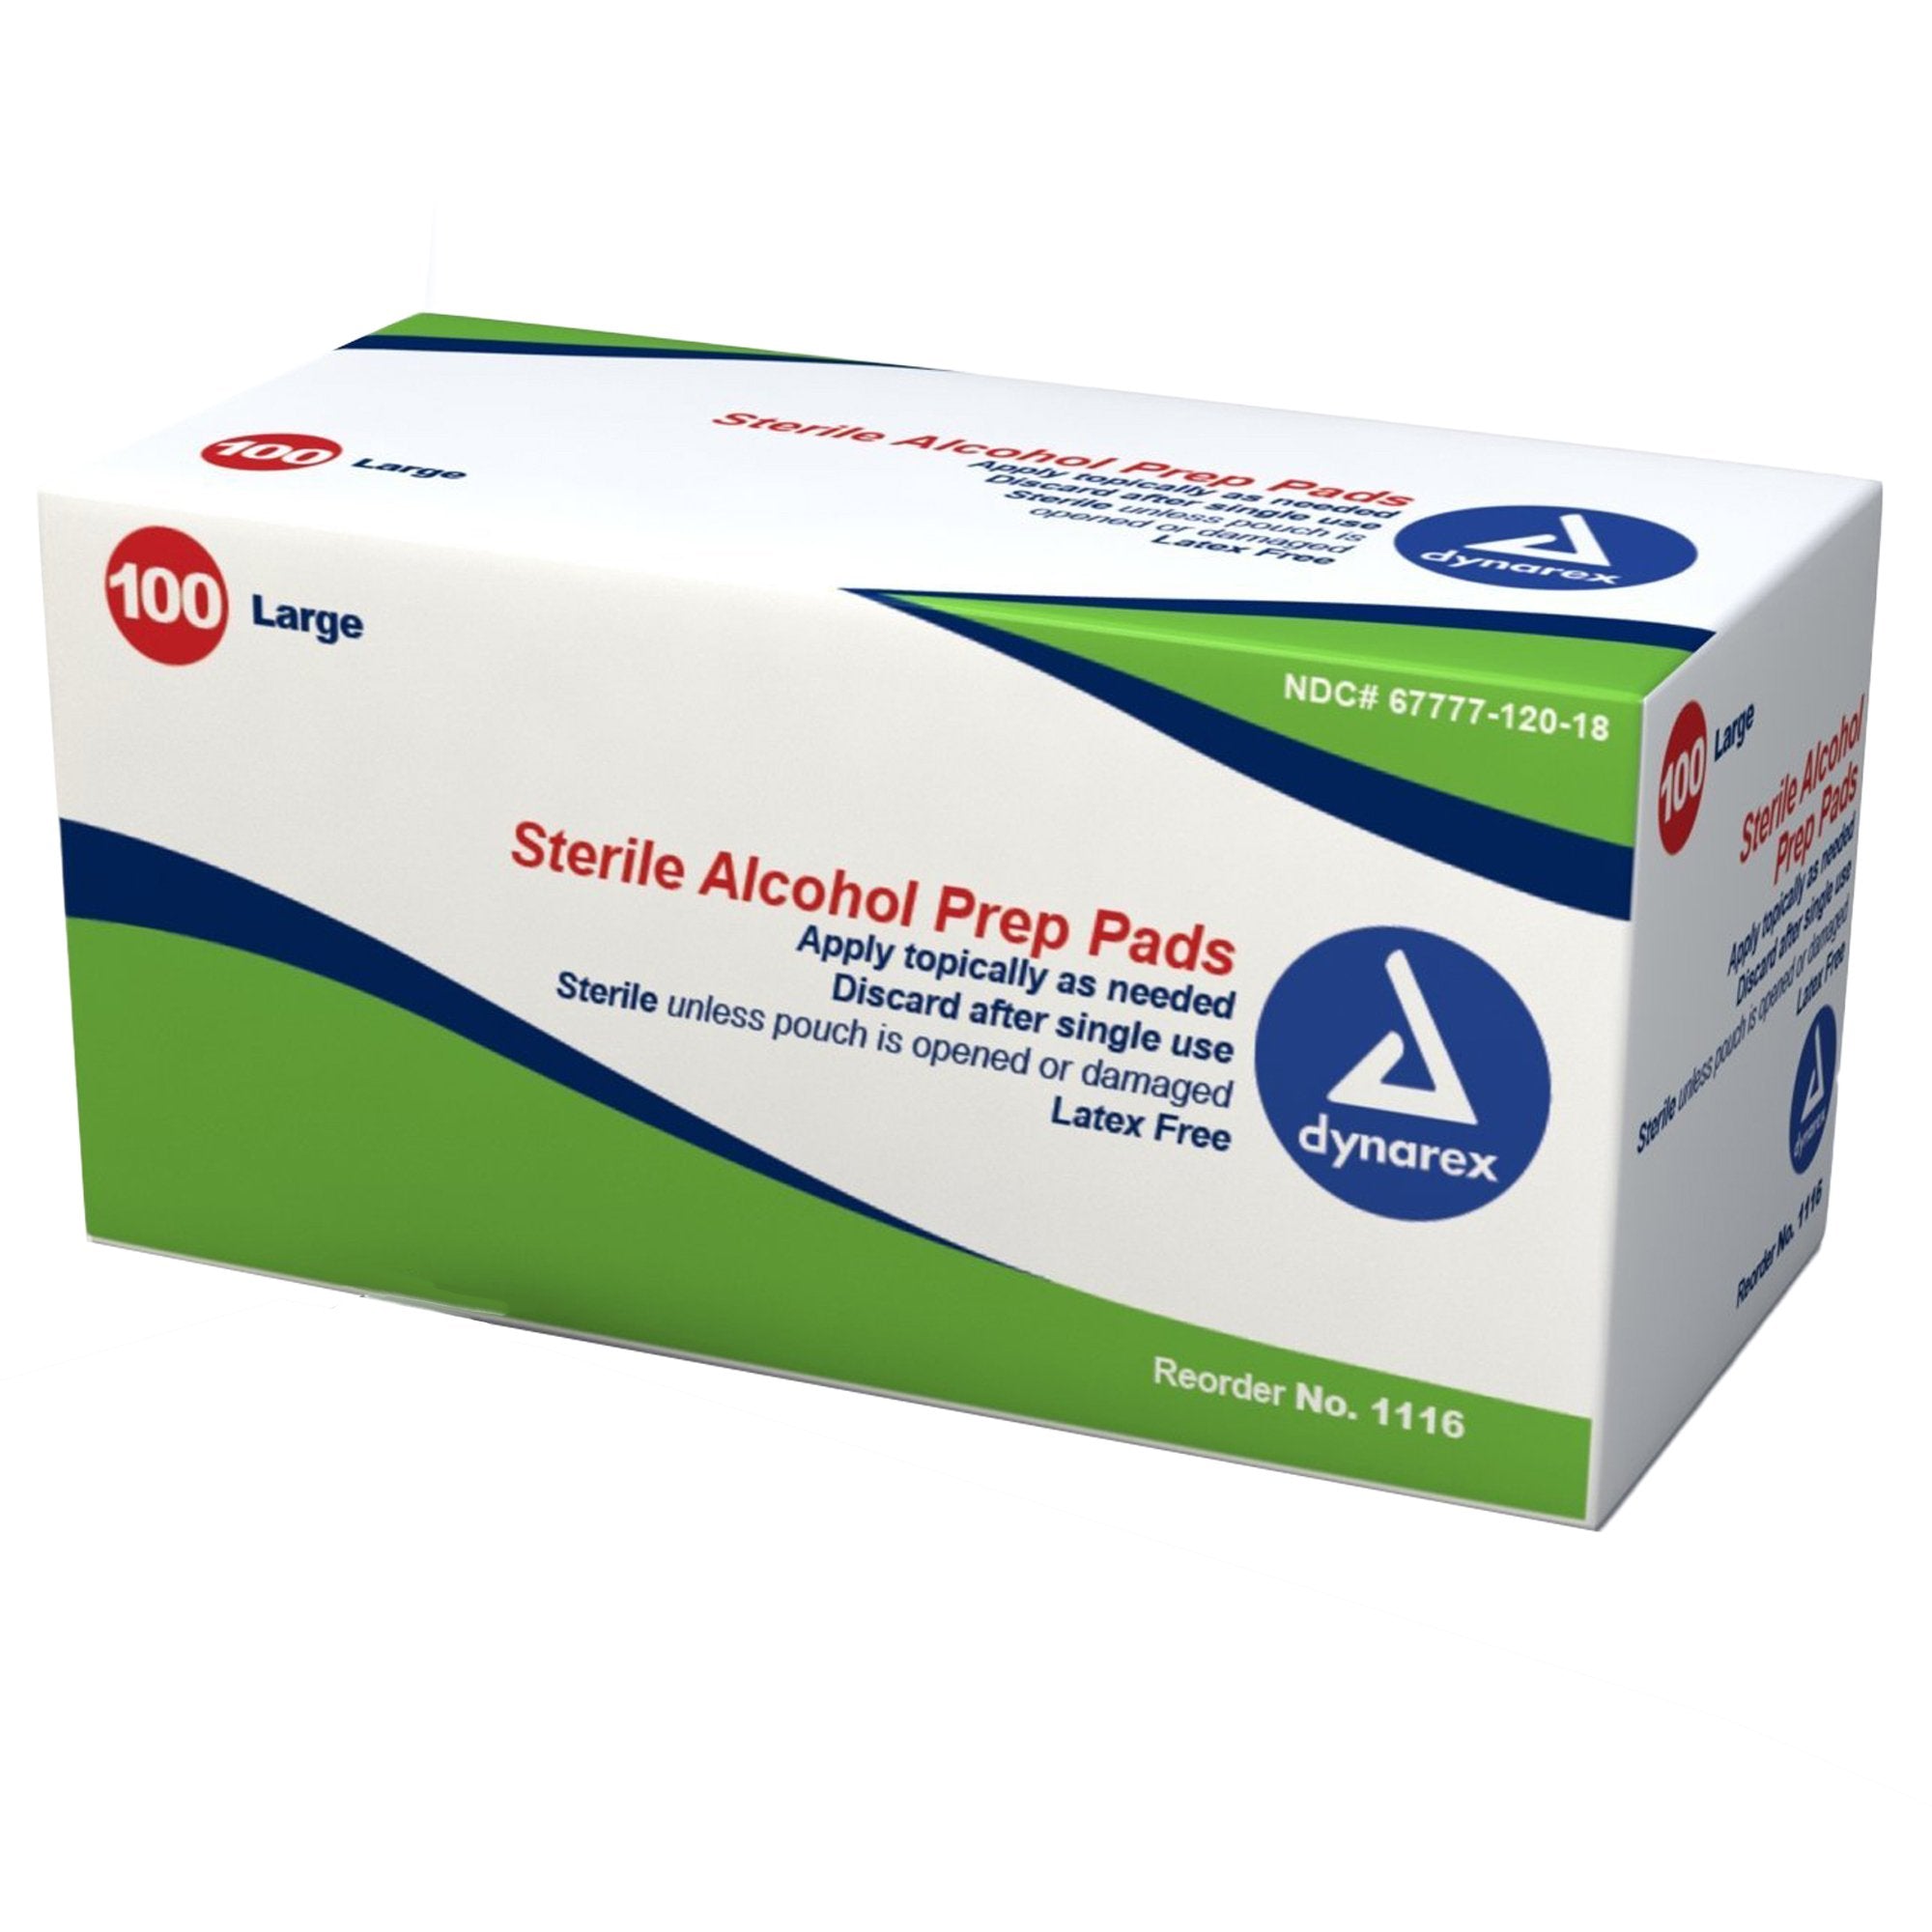 Alcohol Prep Pad Dynarex 70% Strength Isopropyl Alcohol Individual Packet Large Sterile